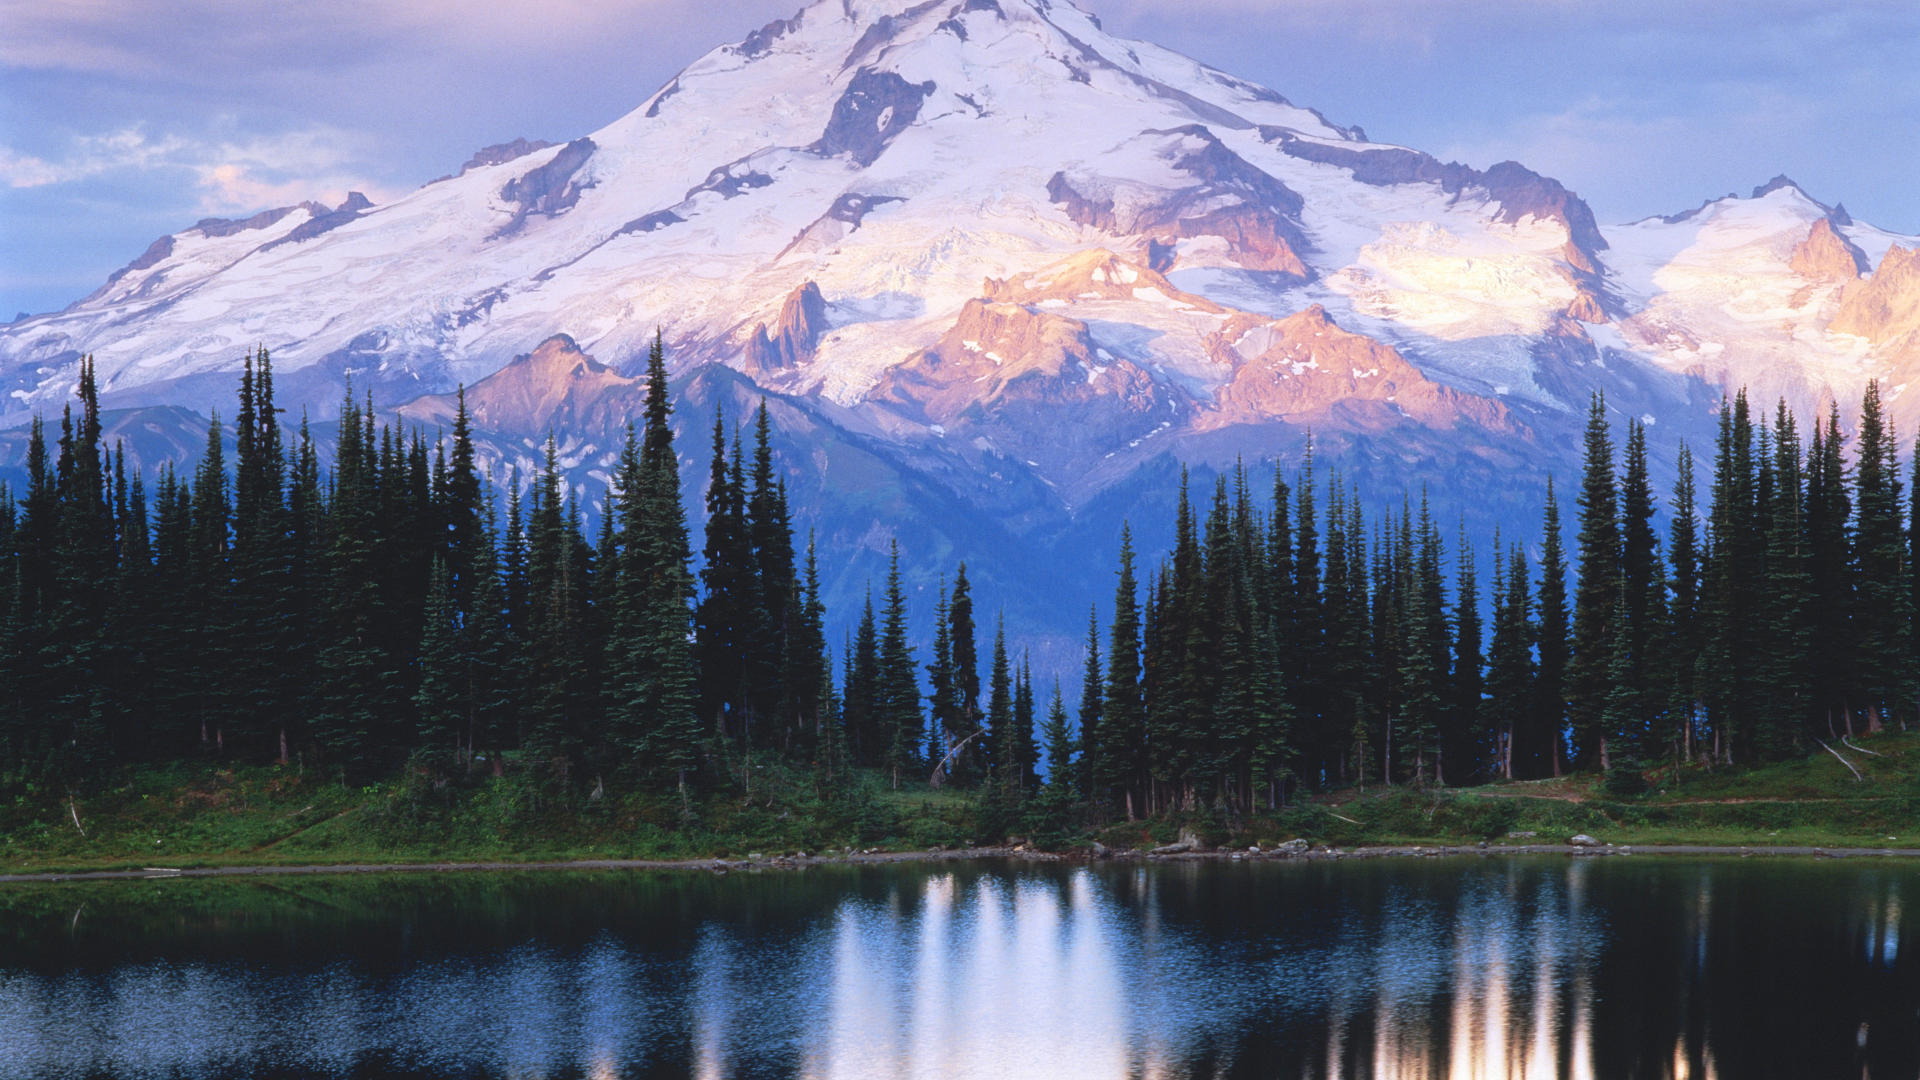  Wilderness Washington   Cool Backgrounds and Wallpapers for your 1920x1080